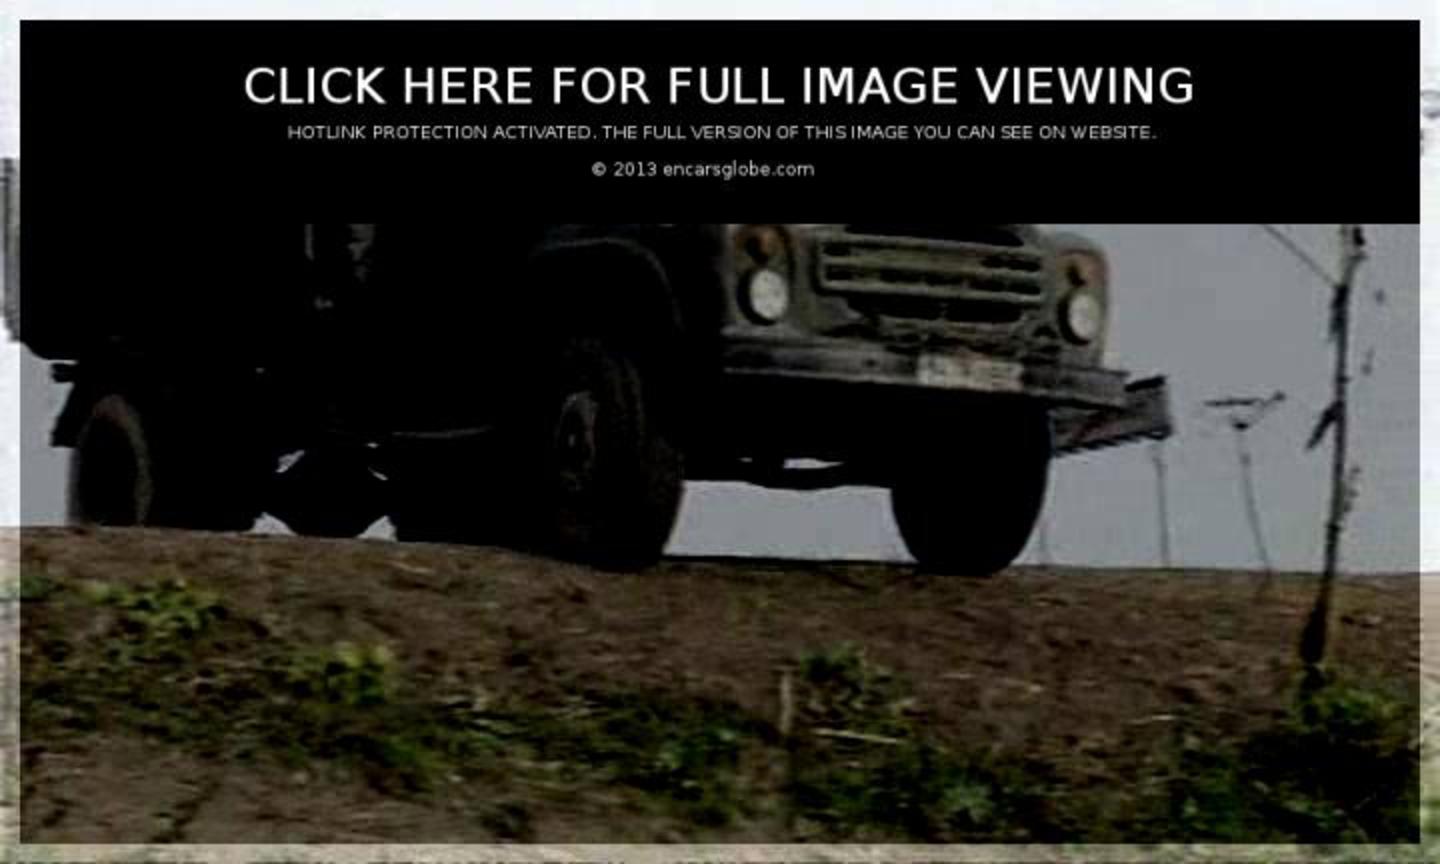 ZiL MMZ-4505 Photo Gallery: Photo #07 out of 12, Image Size - 250 ...